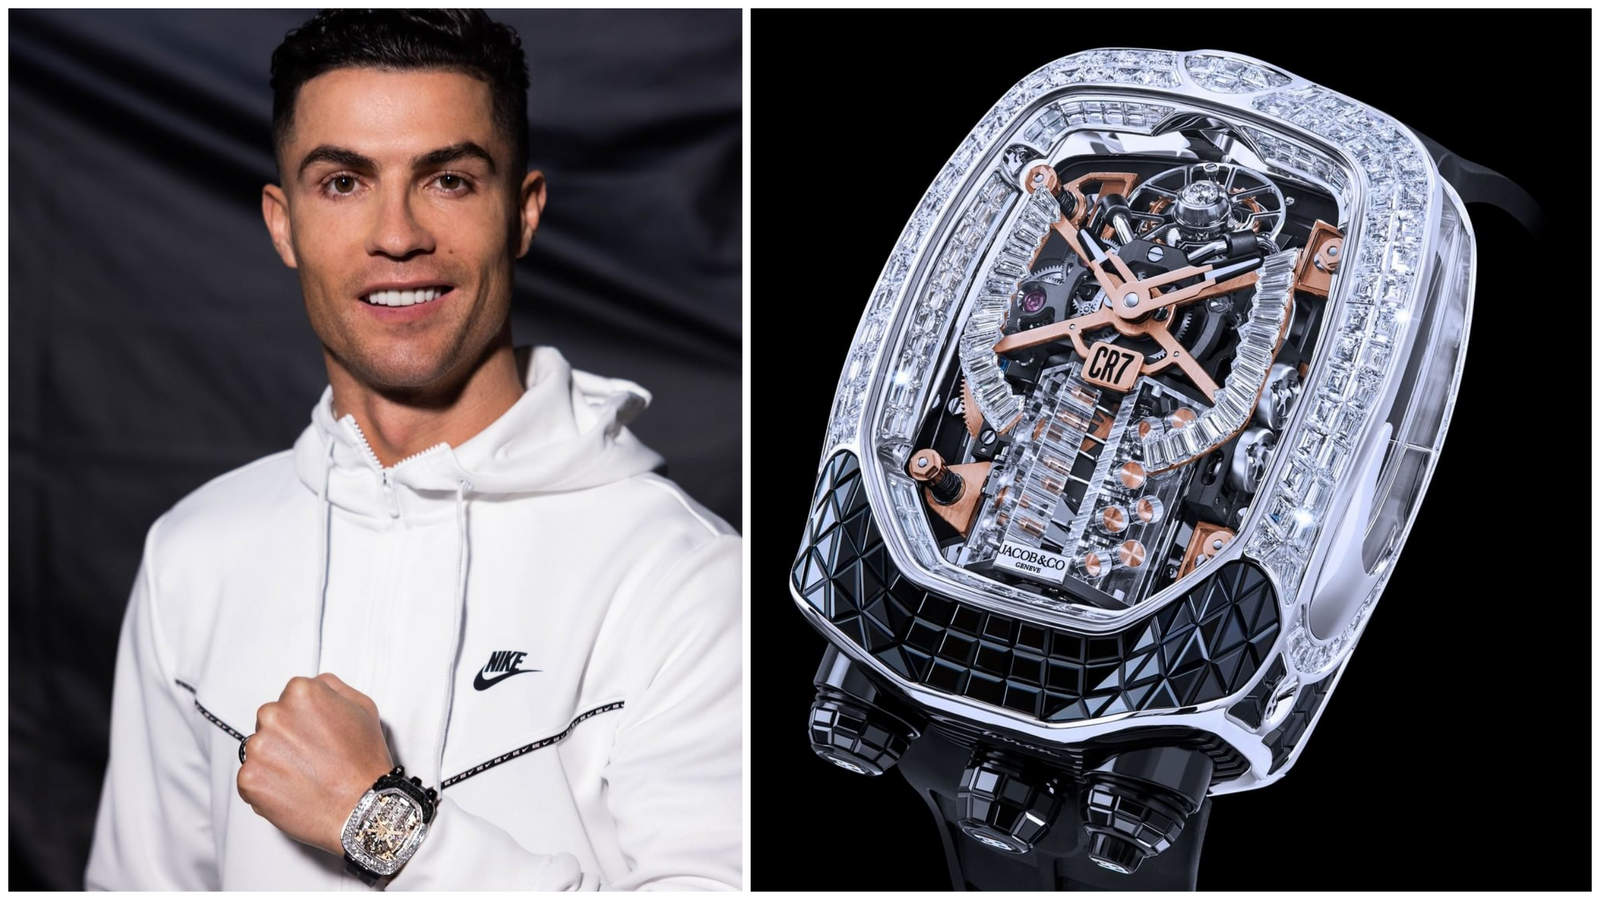 Cristiano Ronaldo has bought a million-dollar watch that is customized to match his Bugatti Chiron